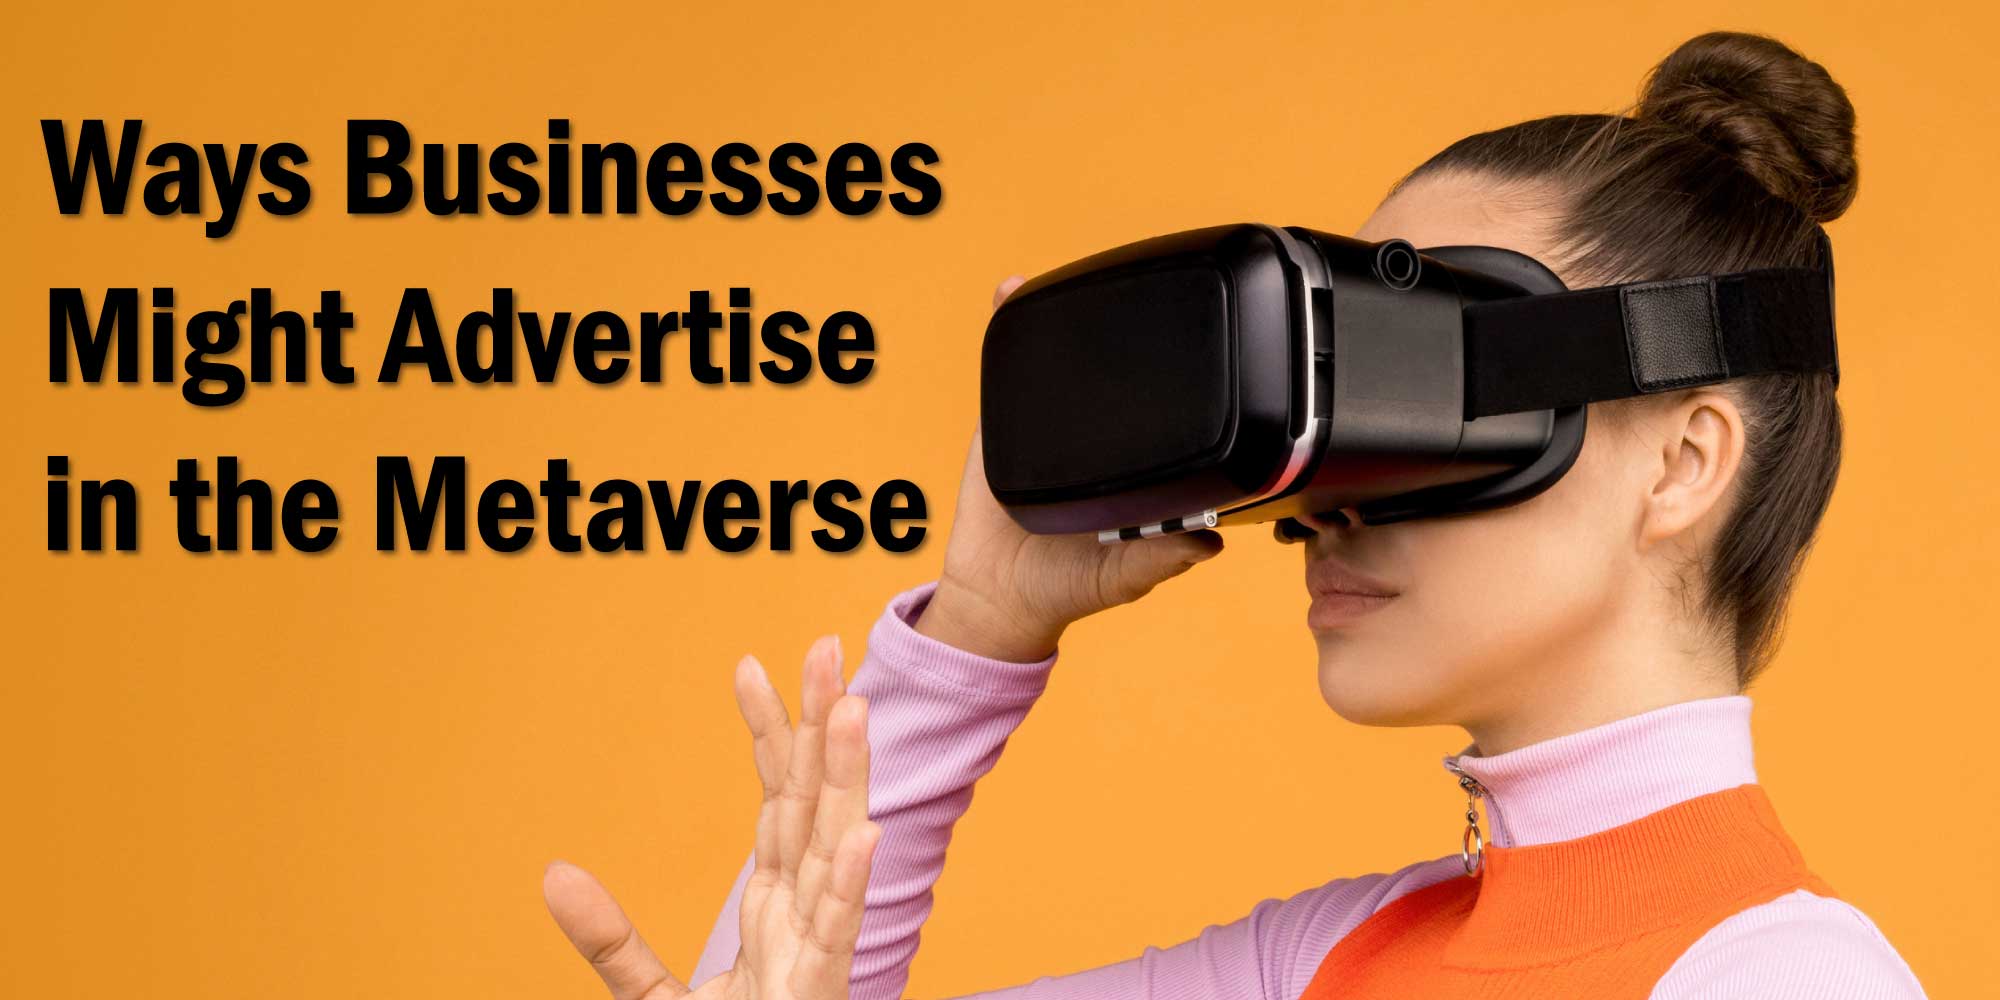 Advertise in the Metaverse